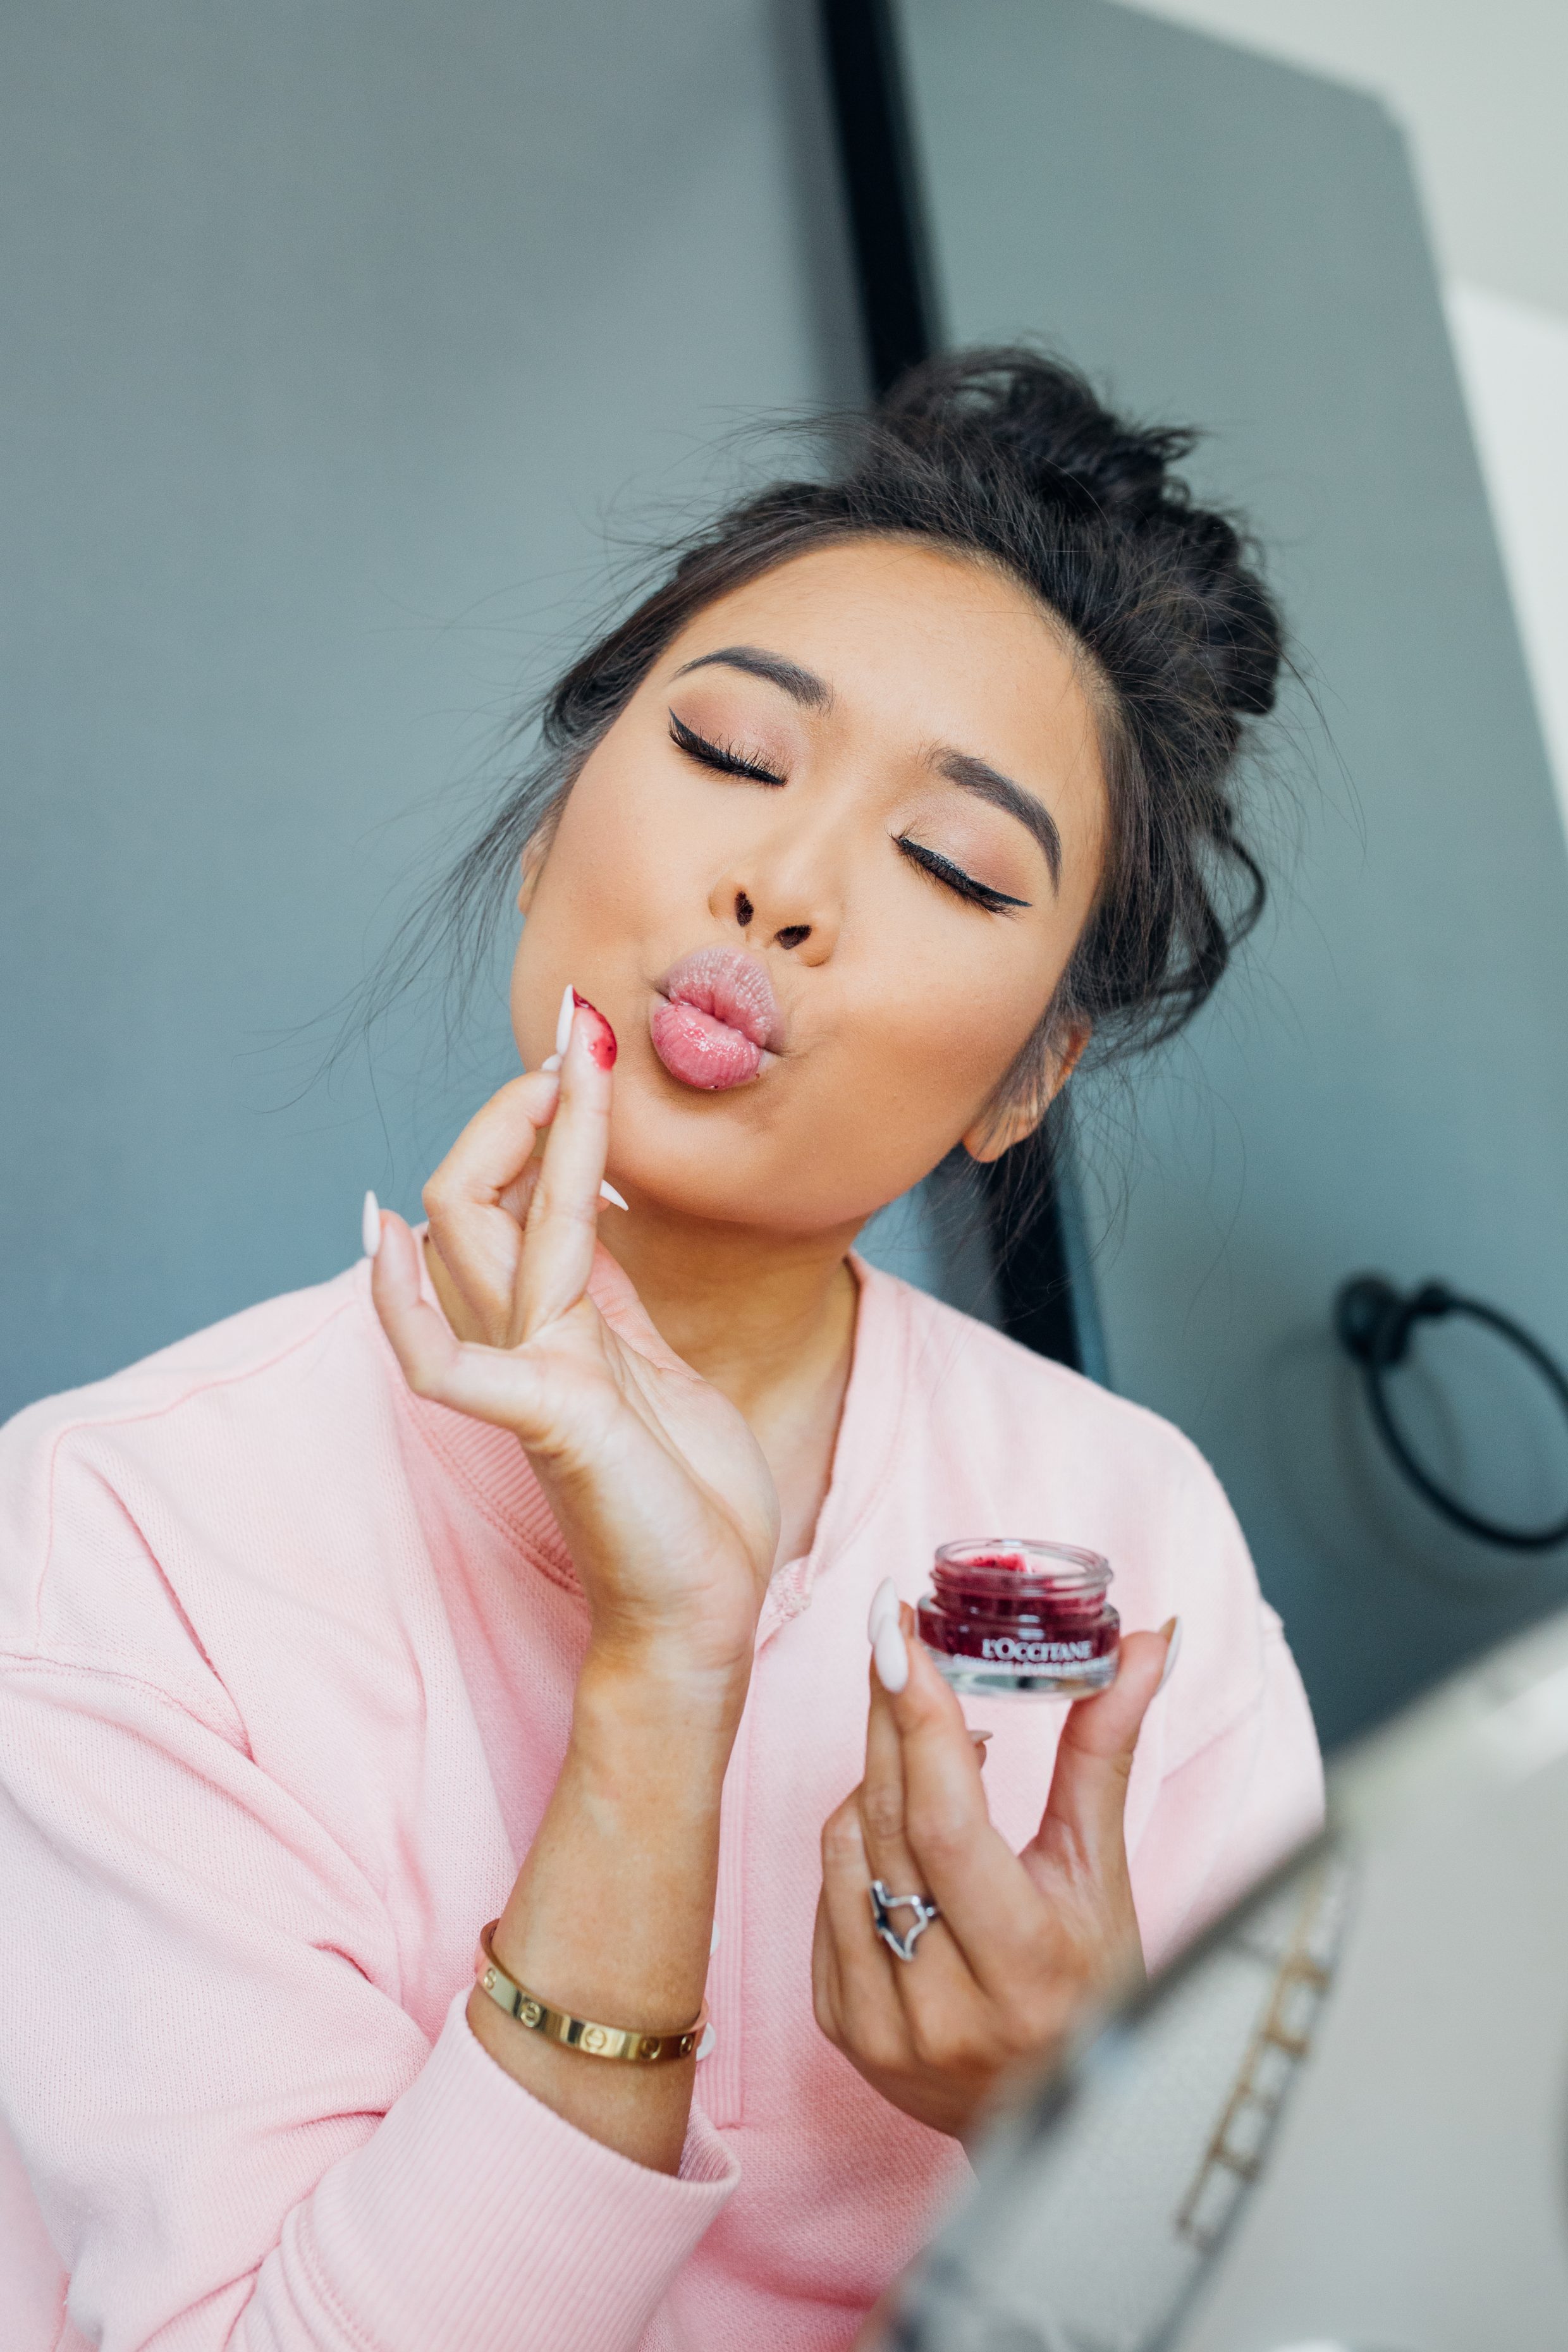 Blogger Hoang-Kim shares how she keeps her lips soft and smooth using L'Occitane